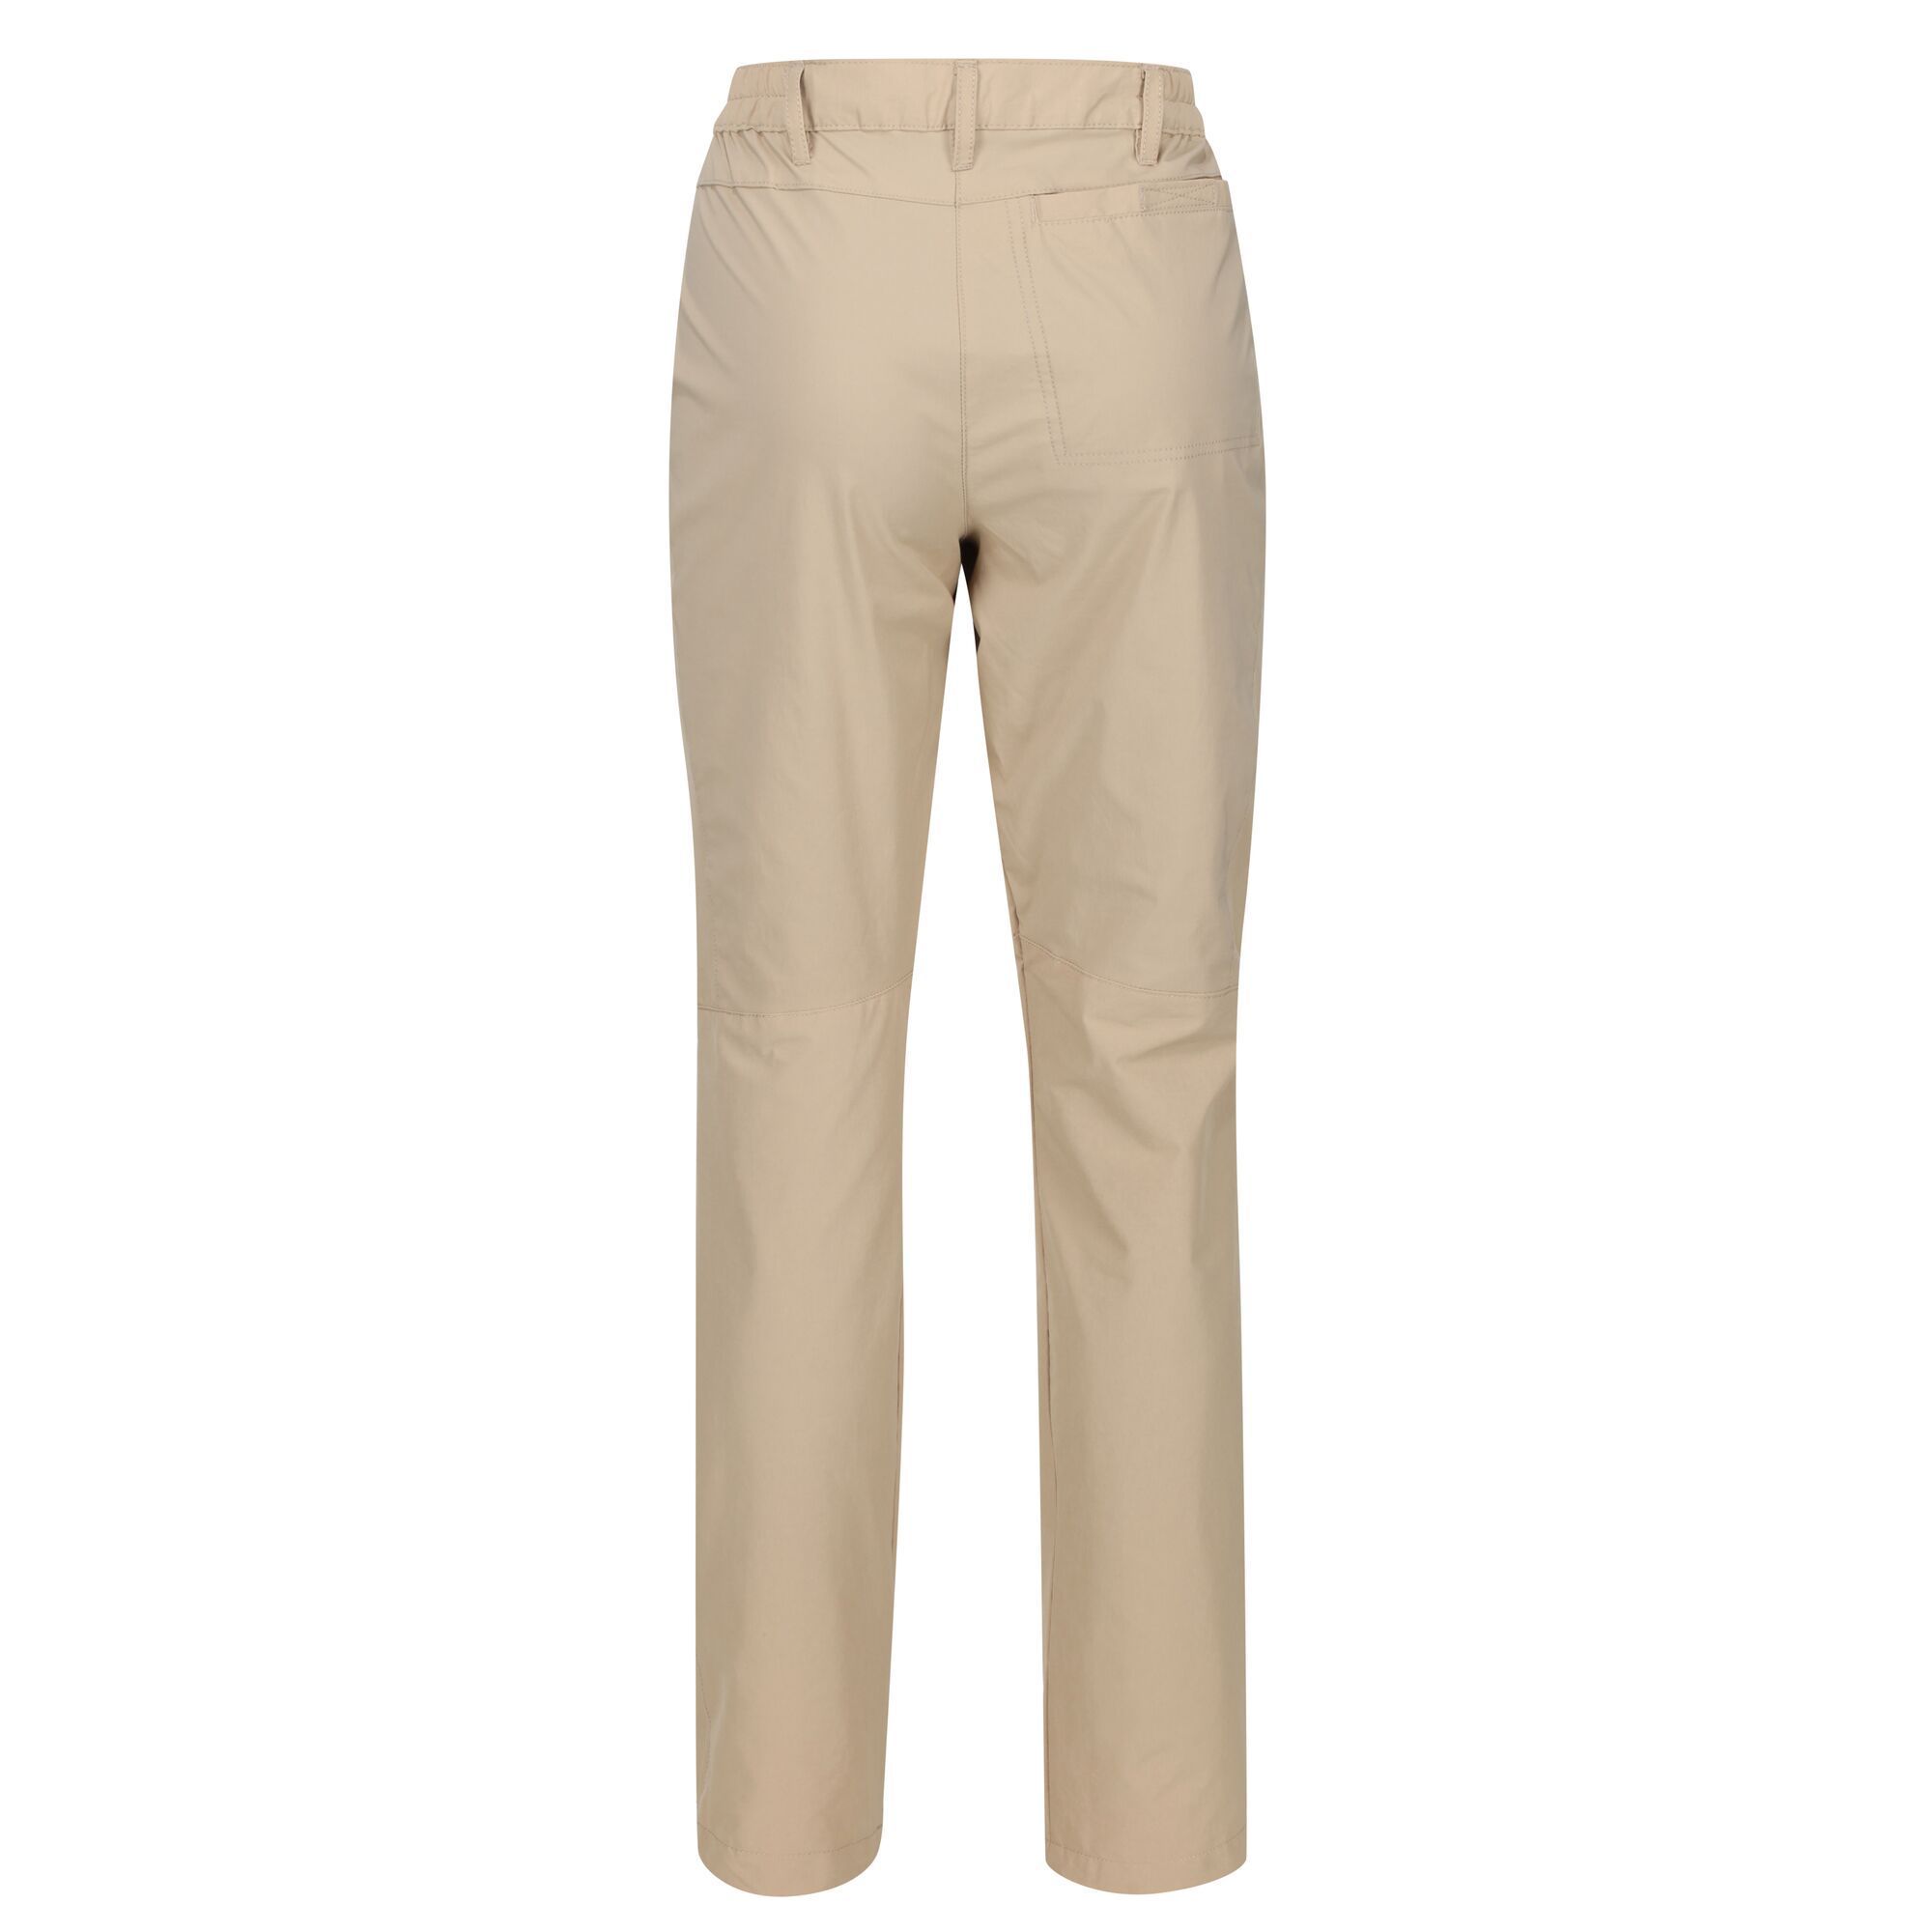 Material: 94% polyamide, 6% elastane. High-stretch, weather-resistant, Isoflex trousers. The lightweight, cool-wearing polyamide stretch fabric has a DWR (durable water repellent) finish. With UPF 40+ sun protection built-in. Features a part elasticated waist. The front and back pockets feature zip fastenings with easy-grab pullers for access on-the-go. With a small Regatta tab. Size (waist/hip): (6 UK) 23in/33in, (8 UK) 25in/35in, (10 UK) 27in/37in, (12 UK) 29in/39in, (14 UK) 31in/41in, (16 UK) 33in/43in, (18 UK) 36in/45in, (20 UK) 38in/47in, (22 UK) 41in/50in, (24 UK) 43/52in, (26 UK) 45/54in, (28 UK) 47in/57in, (30 UK) 49in/59in, (32 UK) 51in/61in, (34 UK) 53in/63in, (36 UK) 55in/65in. Size (leg length): (S) 29in, (R) 31in, (L) 33in.